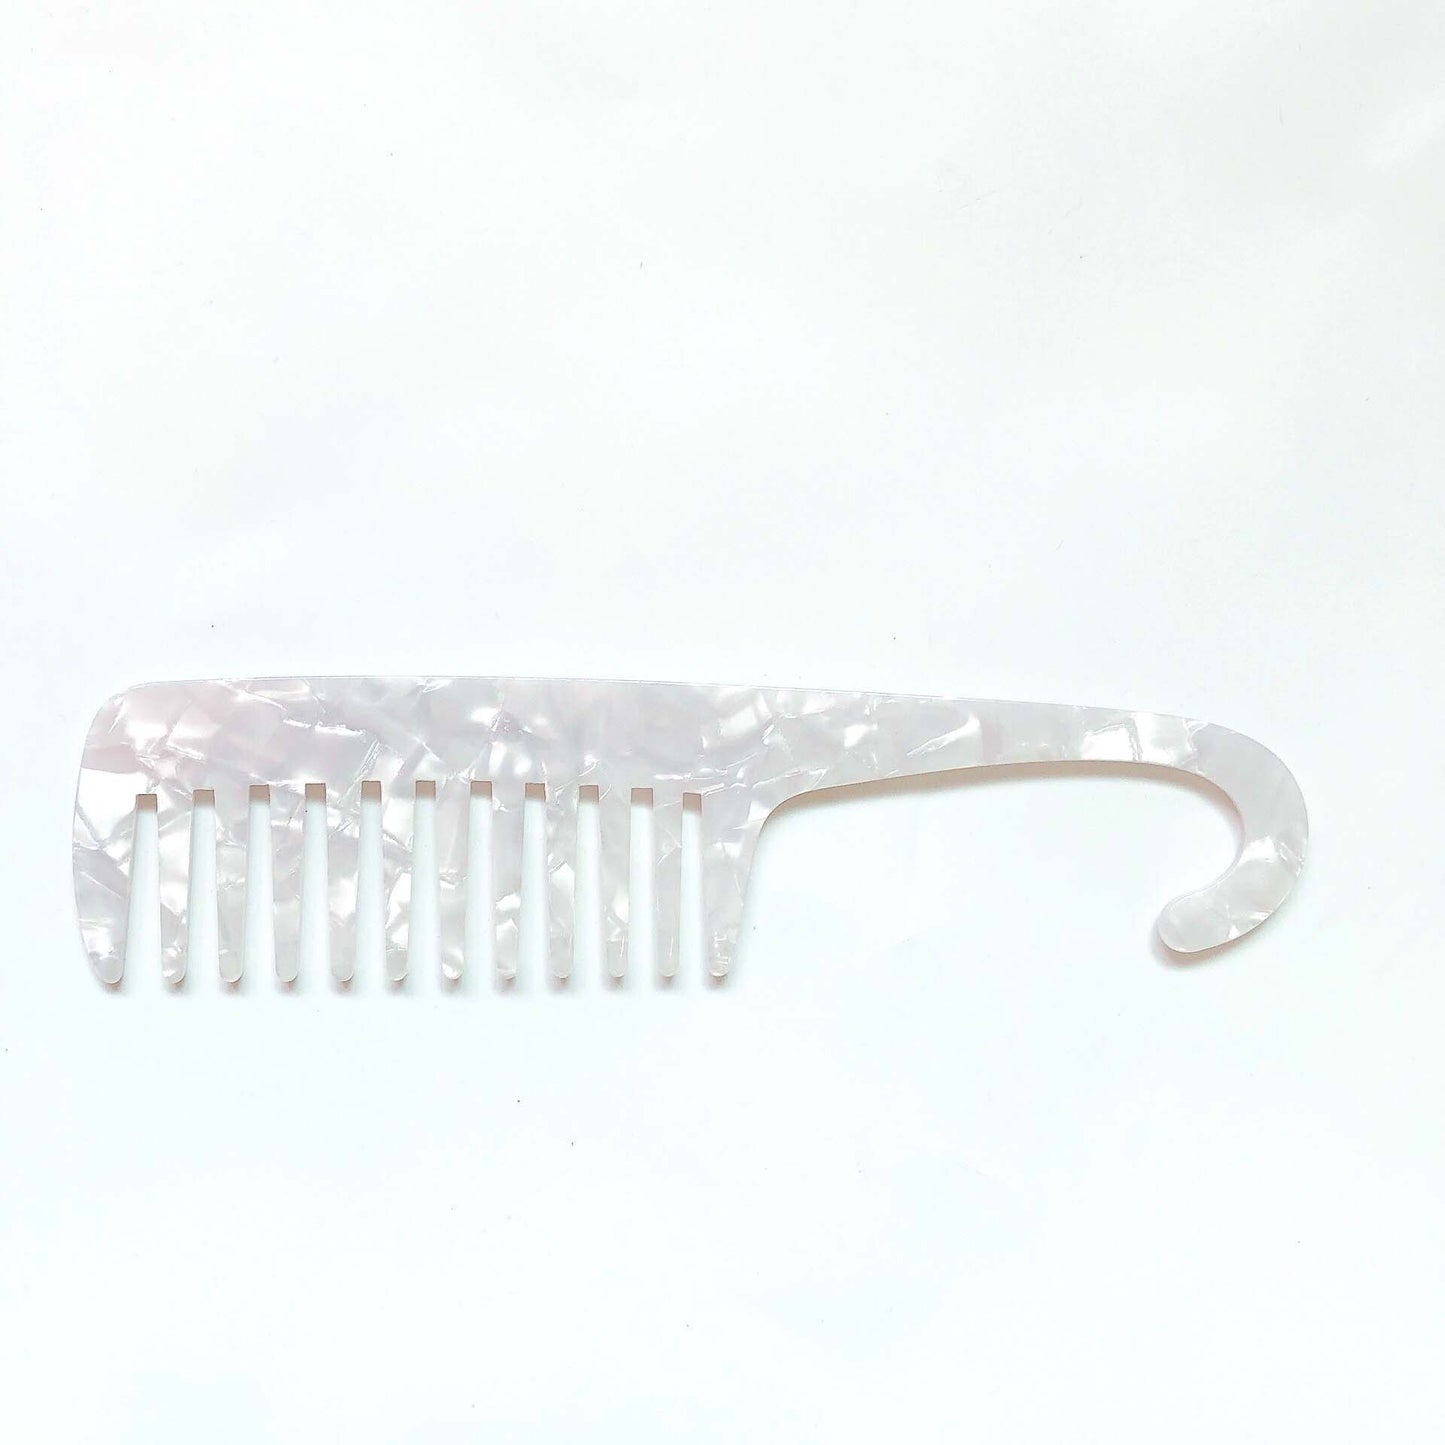 Wide tooth combs for use the bath and shower. These combs help to protect your hair and reduce damage to the strands when removing knots and tangles or working through hair conditioner